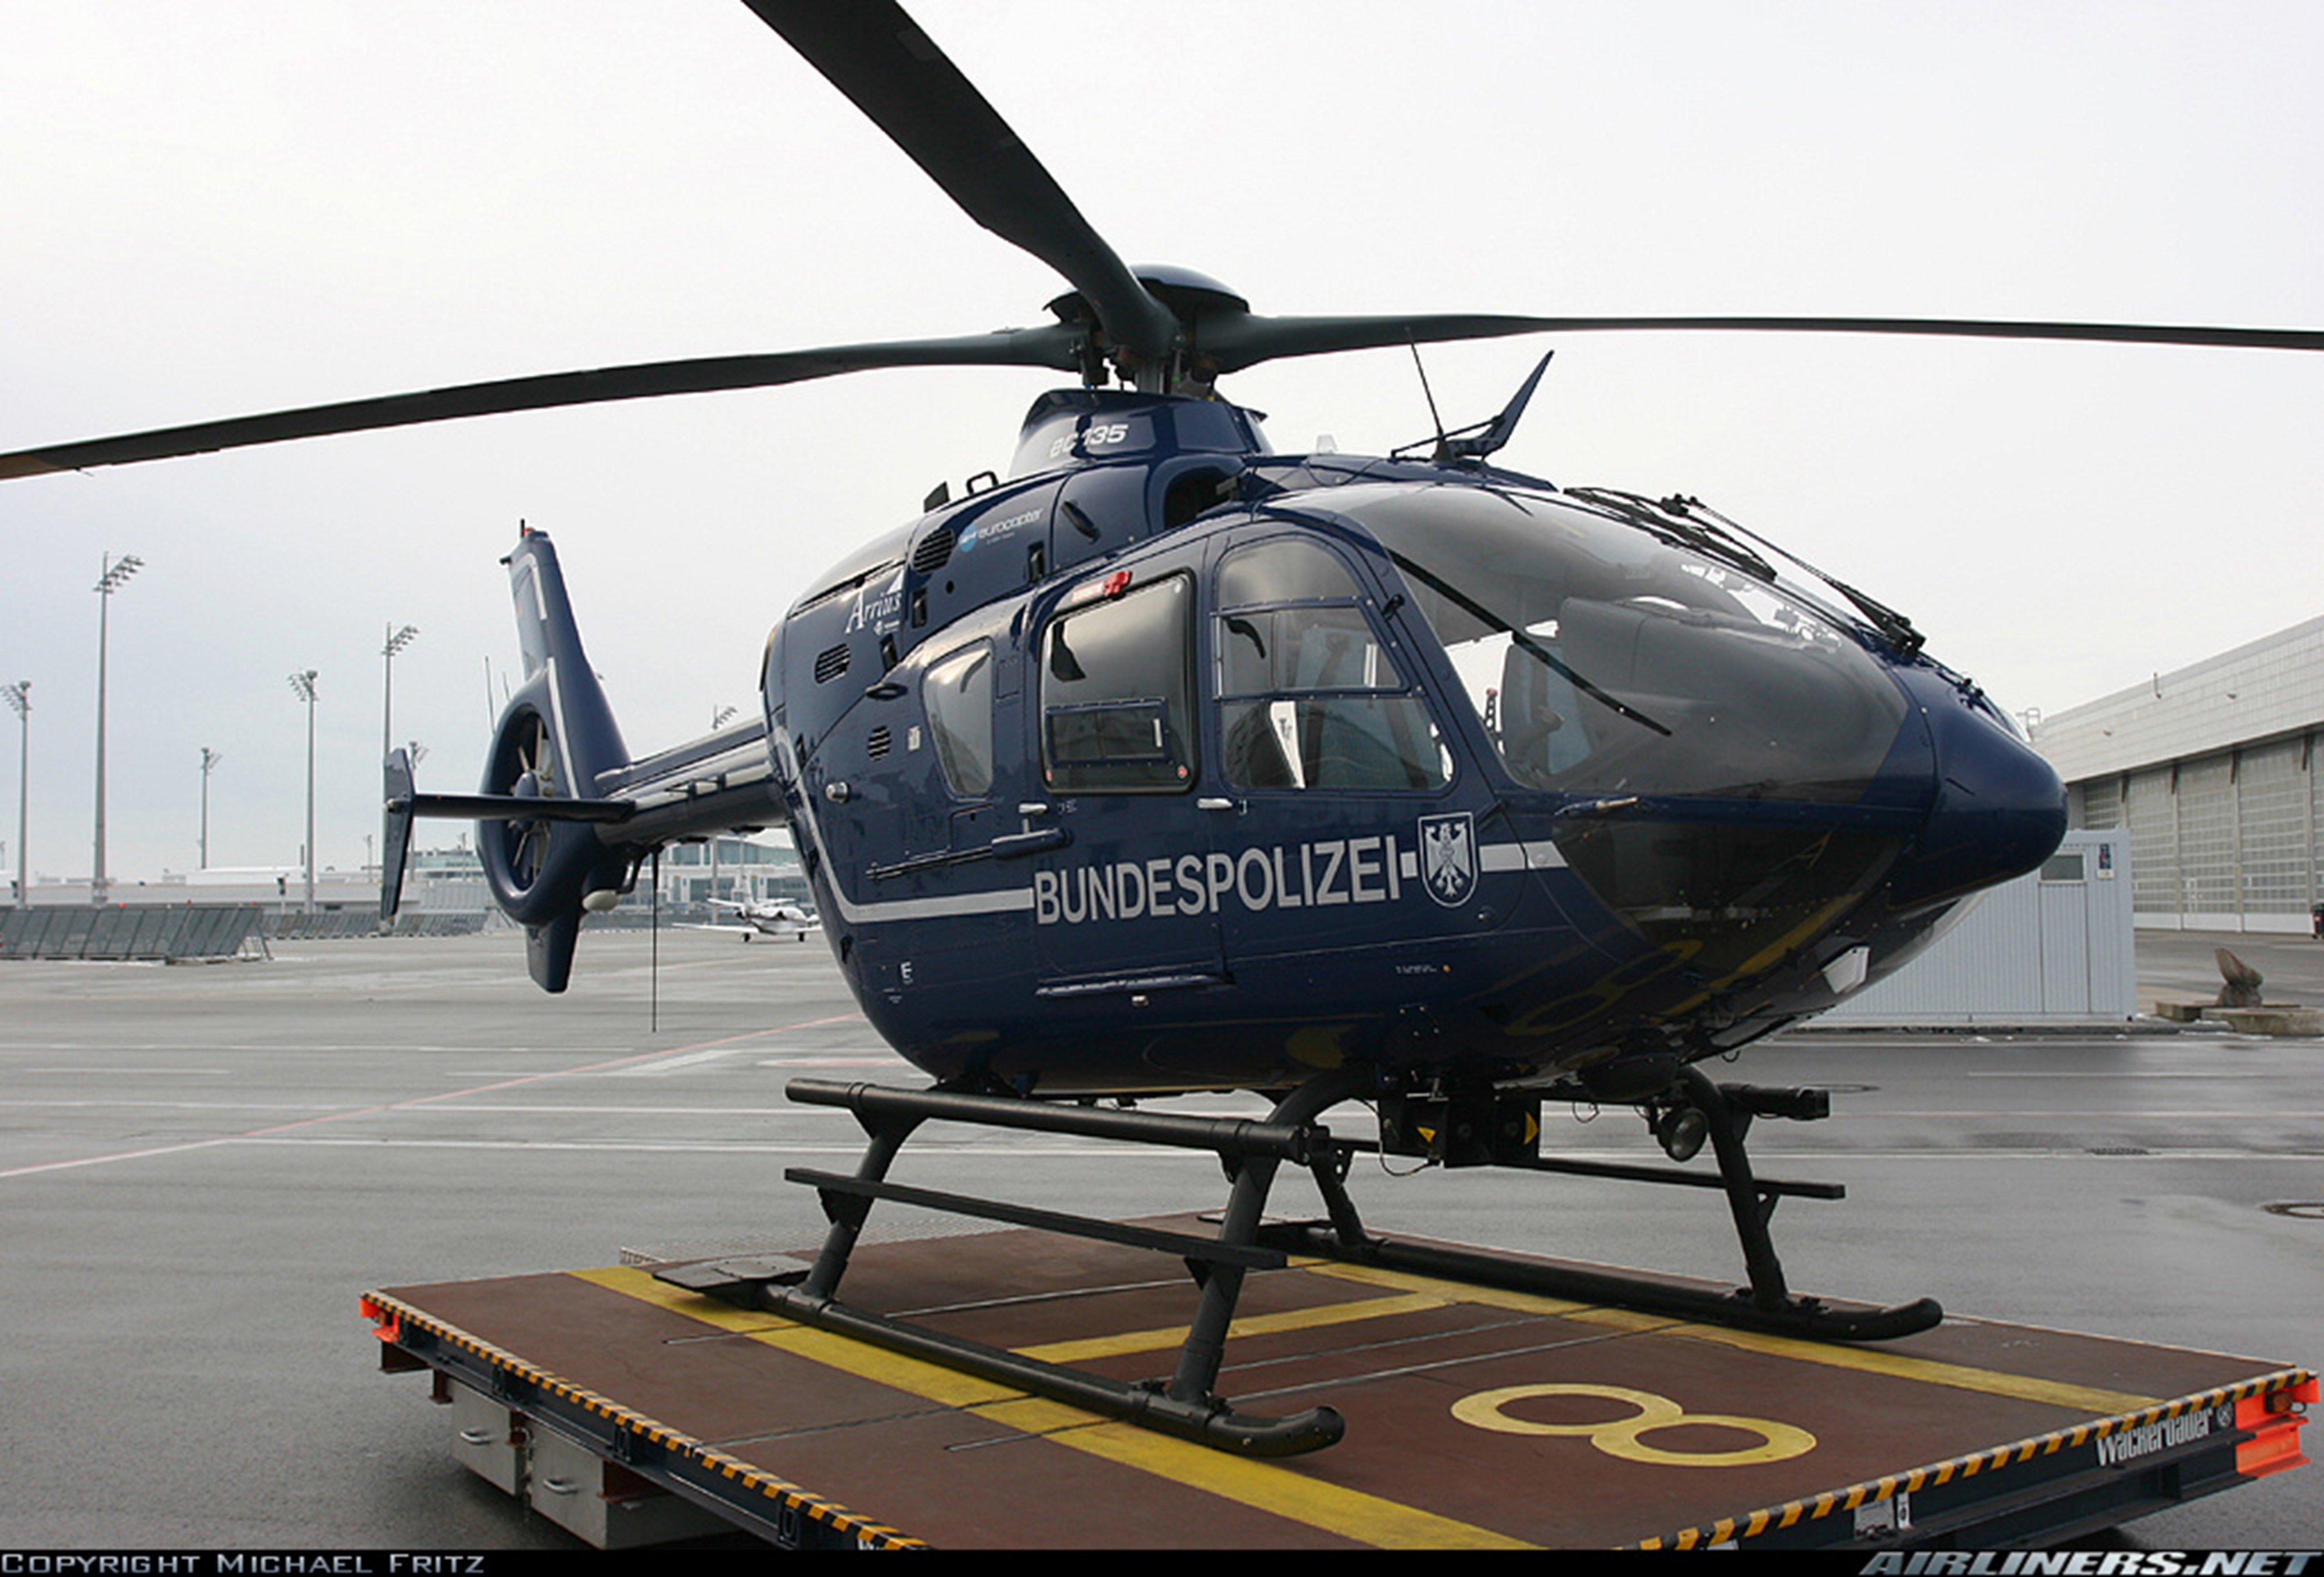 helicopter, Aircraft, Police, Federal, Germany, Eurocopter, Ec 135, Bundespolizei Wallpaper